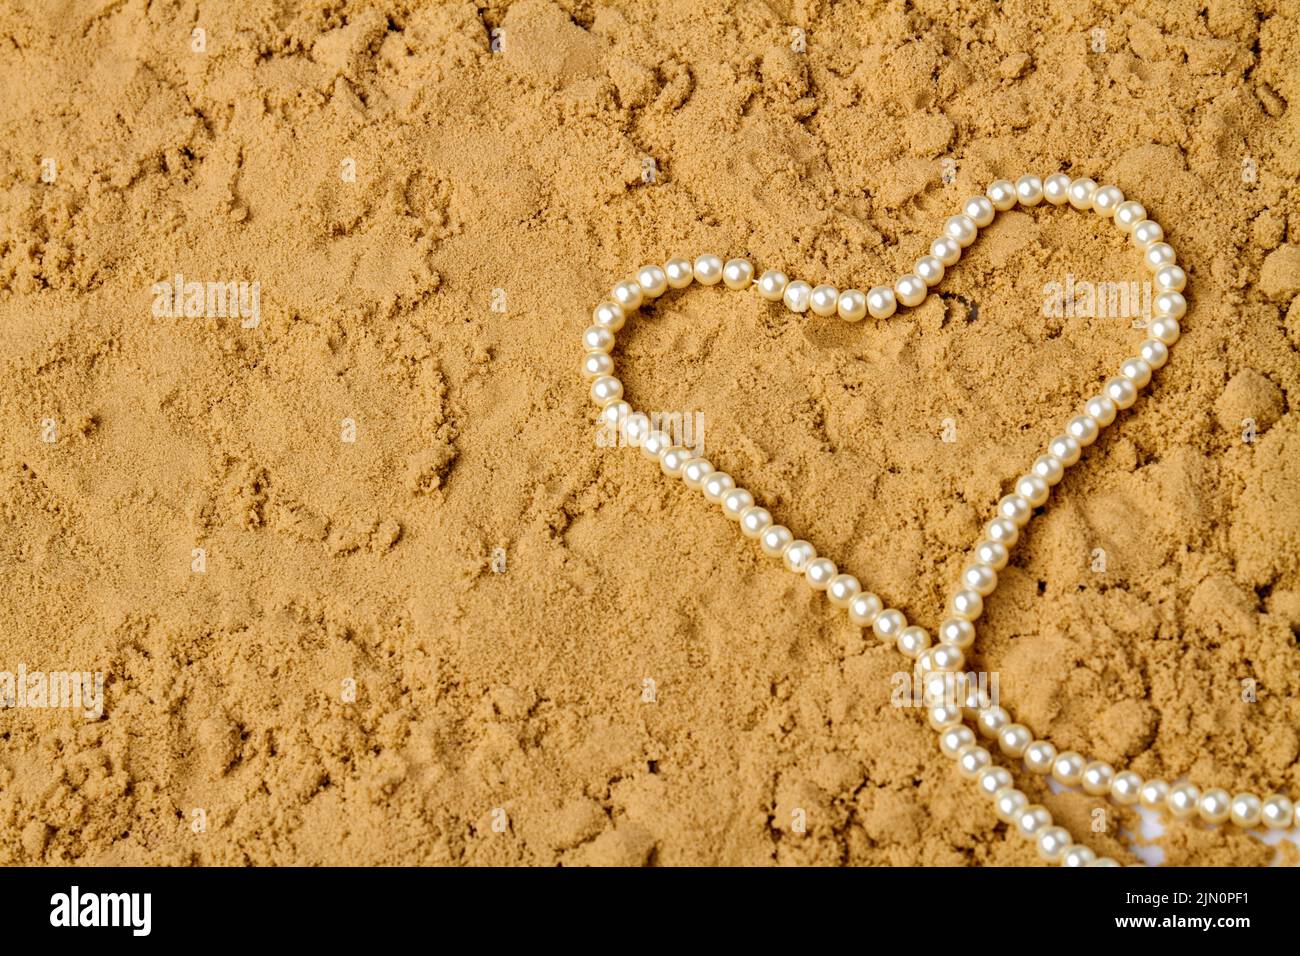 Heart made of white pearls on wet sand. Top view copy space. Stock Photo